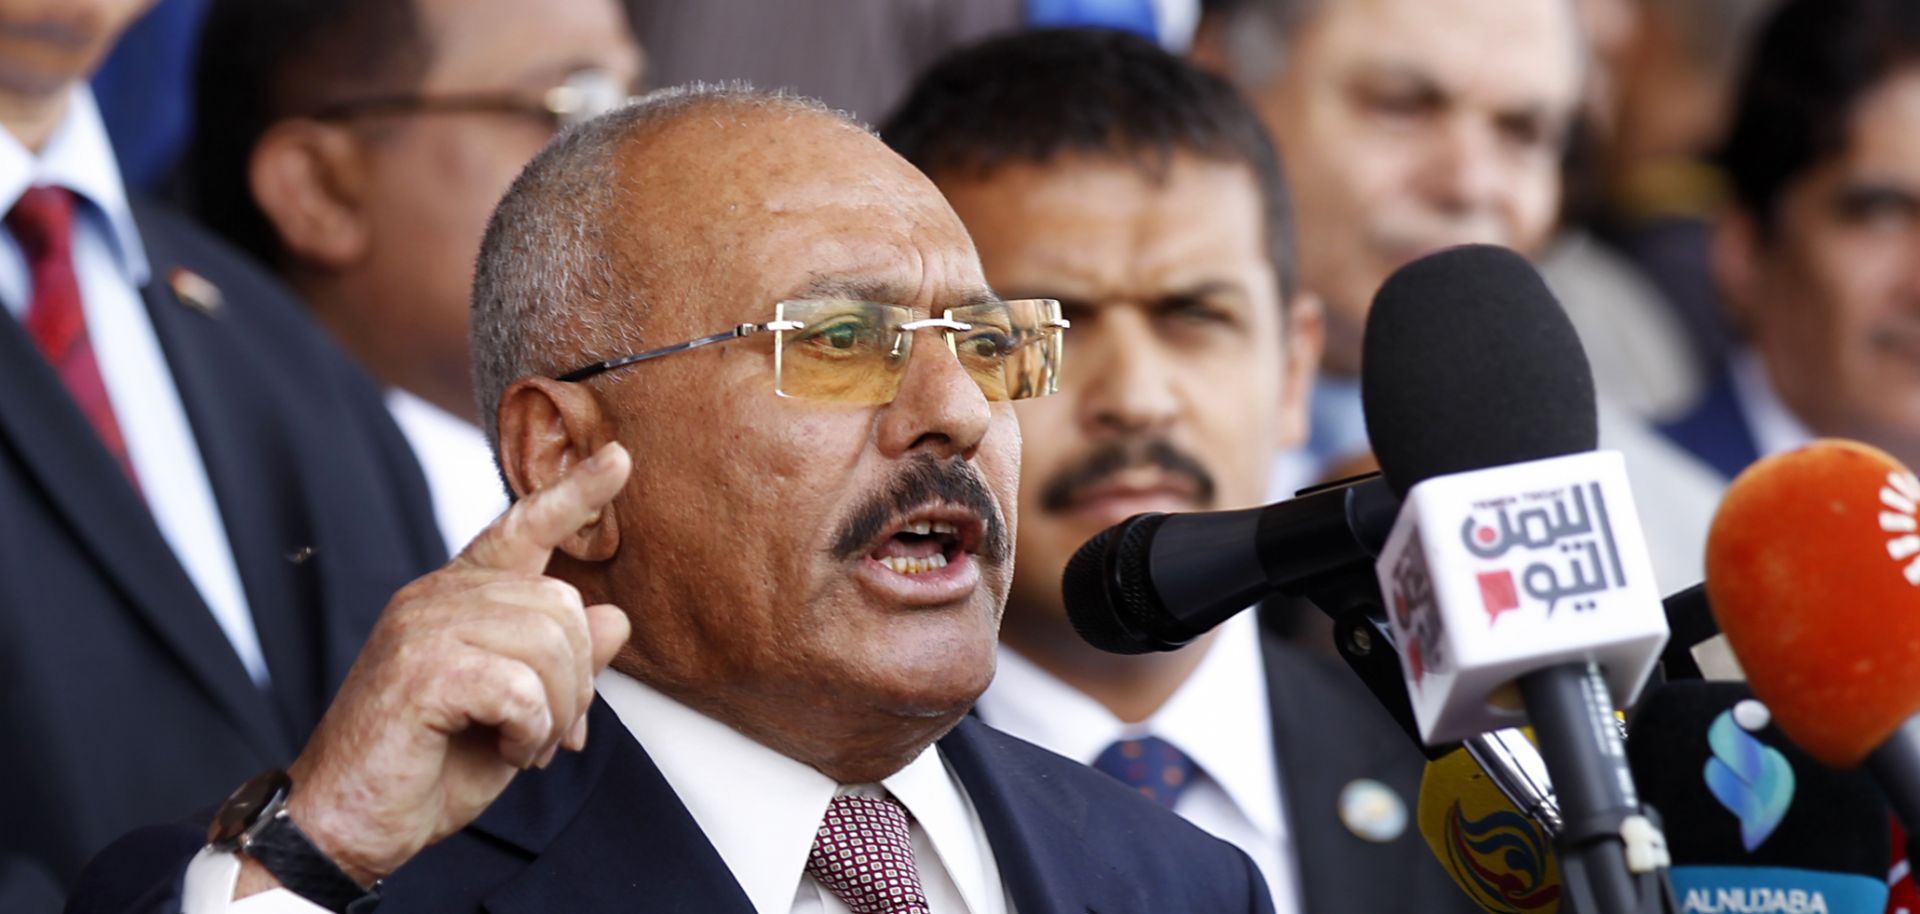 Former president of Yemen, Ali Abdullah Saleh, delivers a speech to his supporters in the capital city of Sanaa on Aug. 24, 2017. 